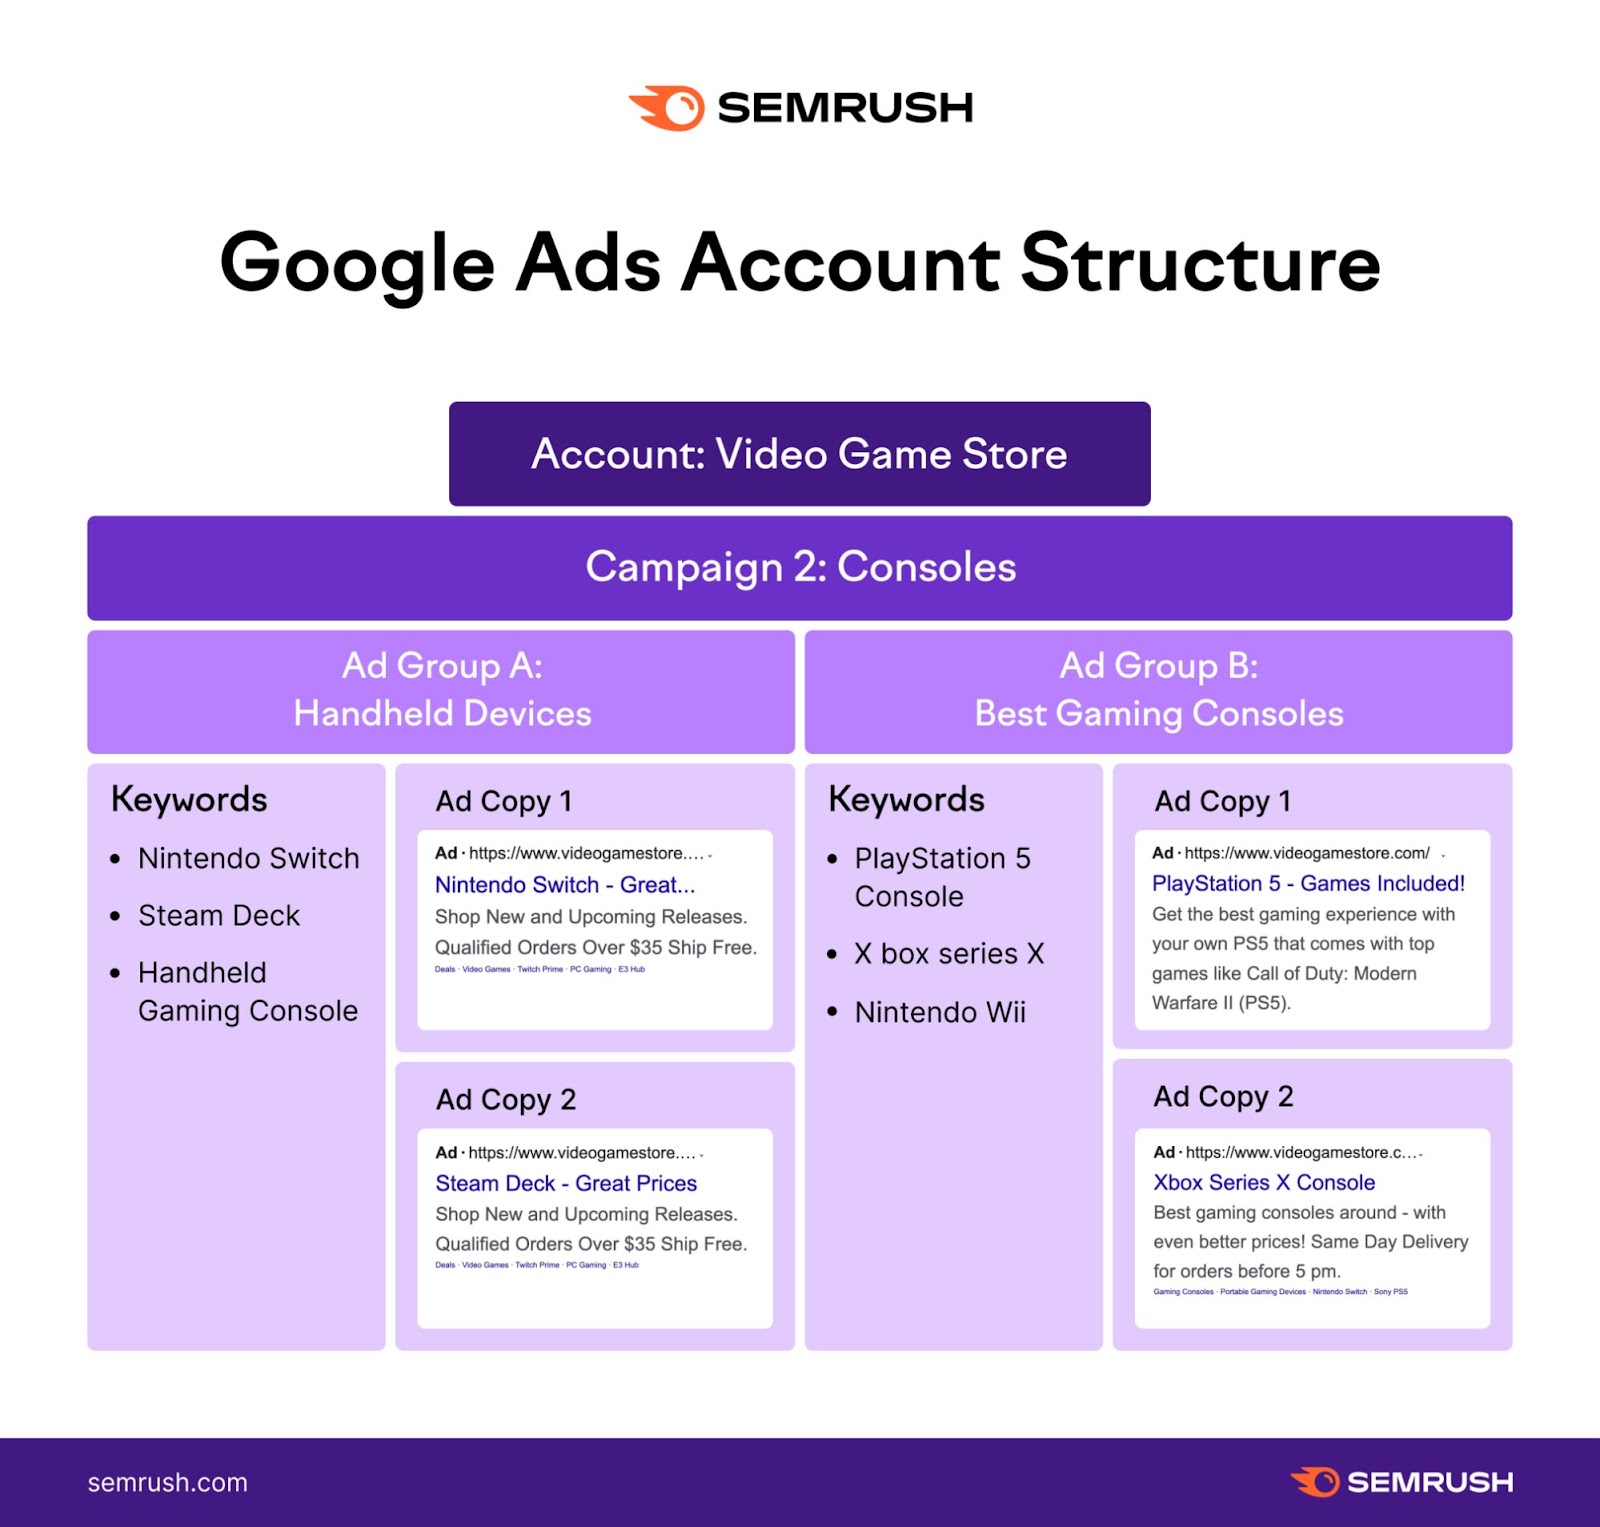 Google Ads account structure, visualizing campaign, ad group, keyword, and ad structure